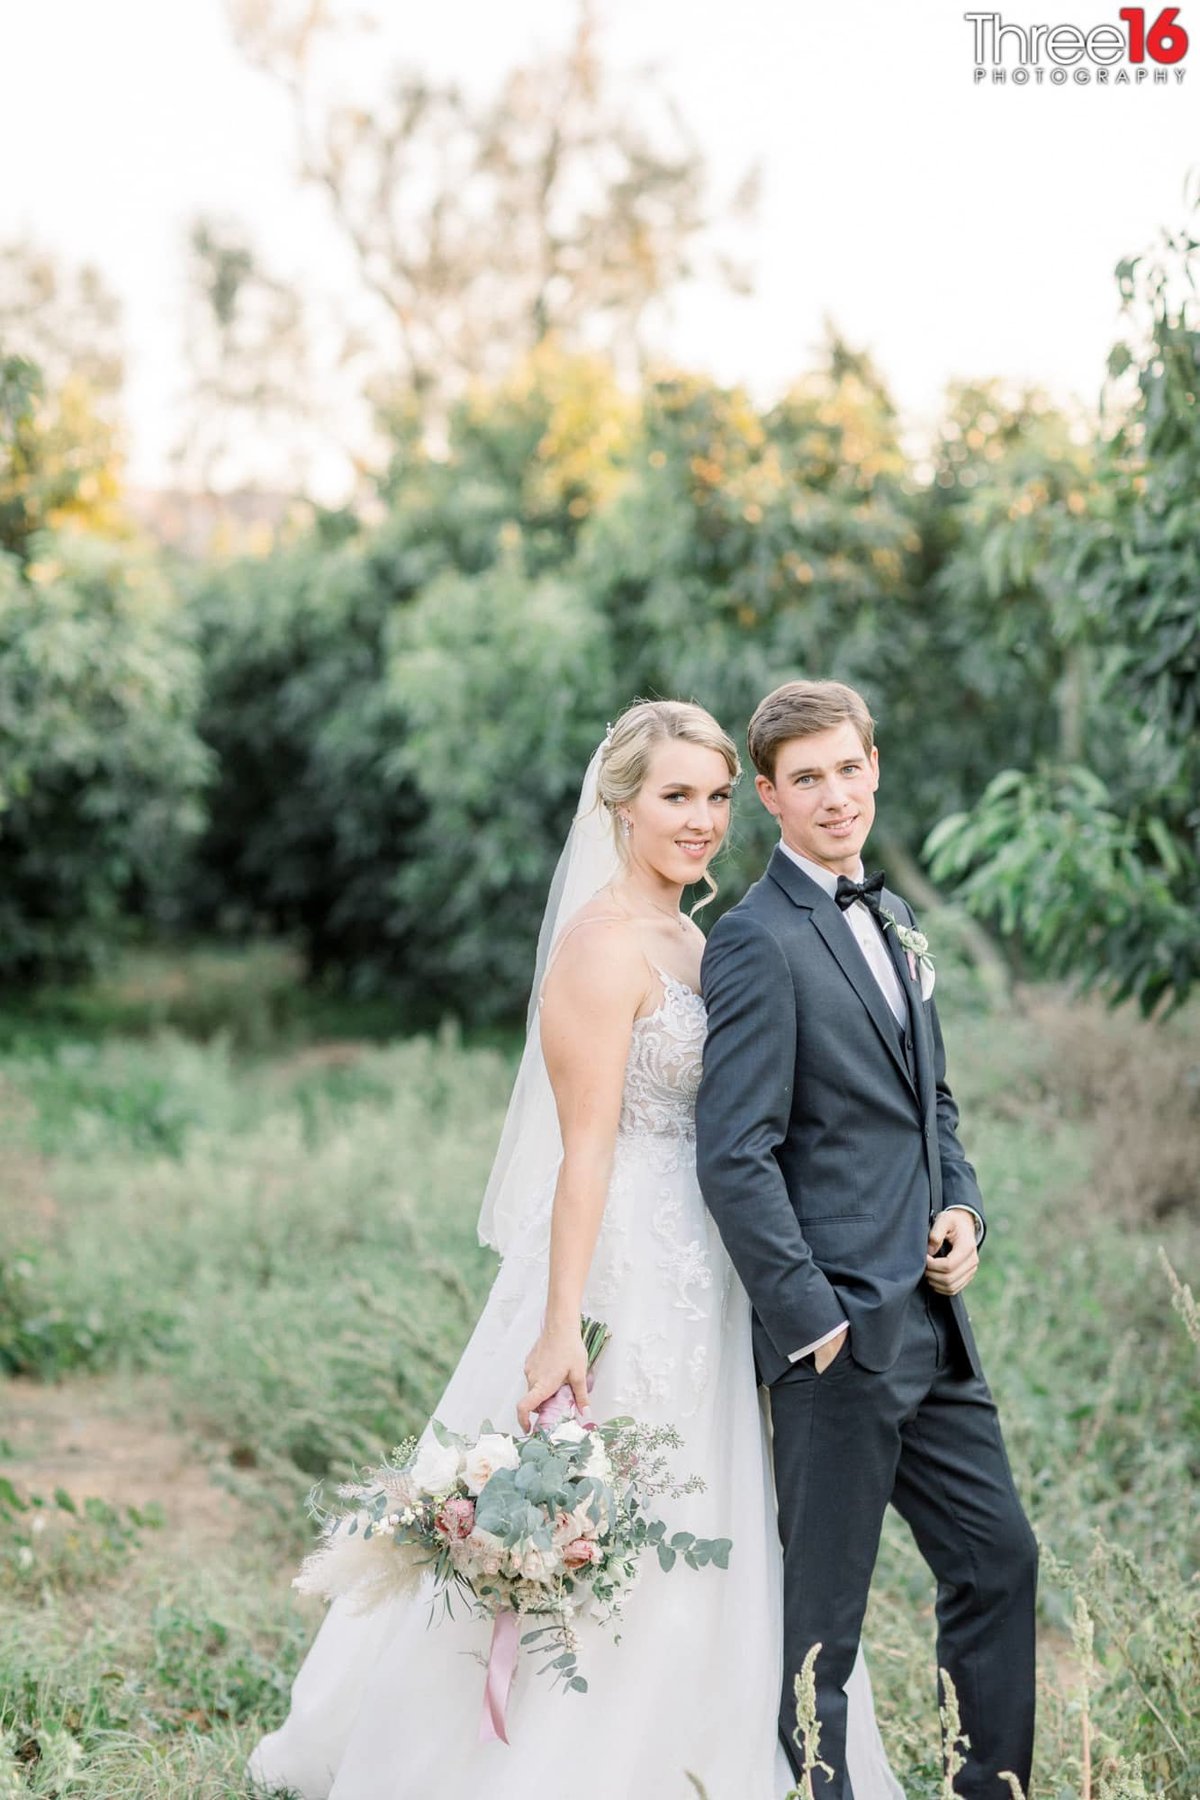 Bride and Groom pose together in the grassy field of Bella Vista Groves